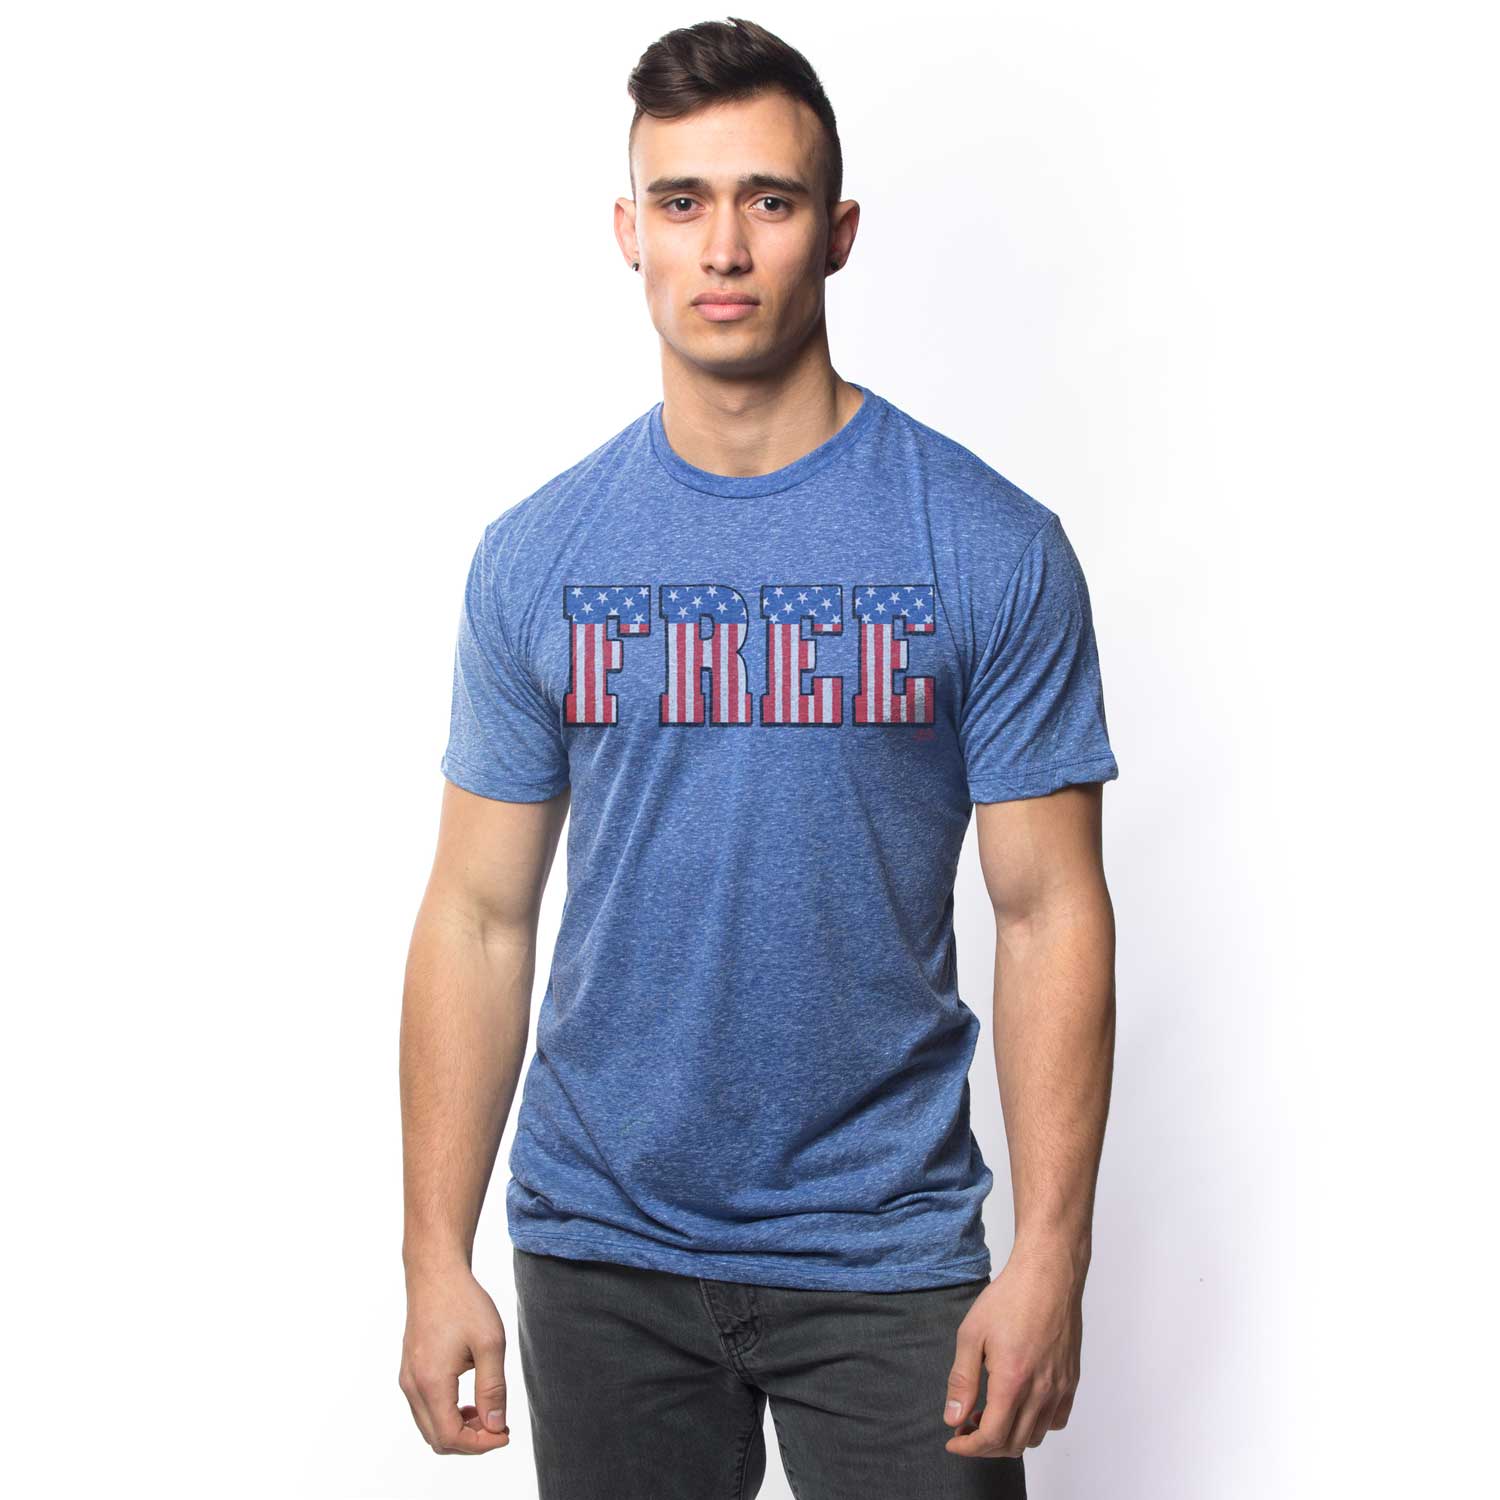 Men's America Free Vintage Inspired T-shirt | Cool Retro Tee with USA Flag Graphic | Solid Threads